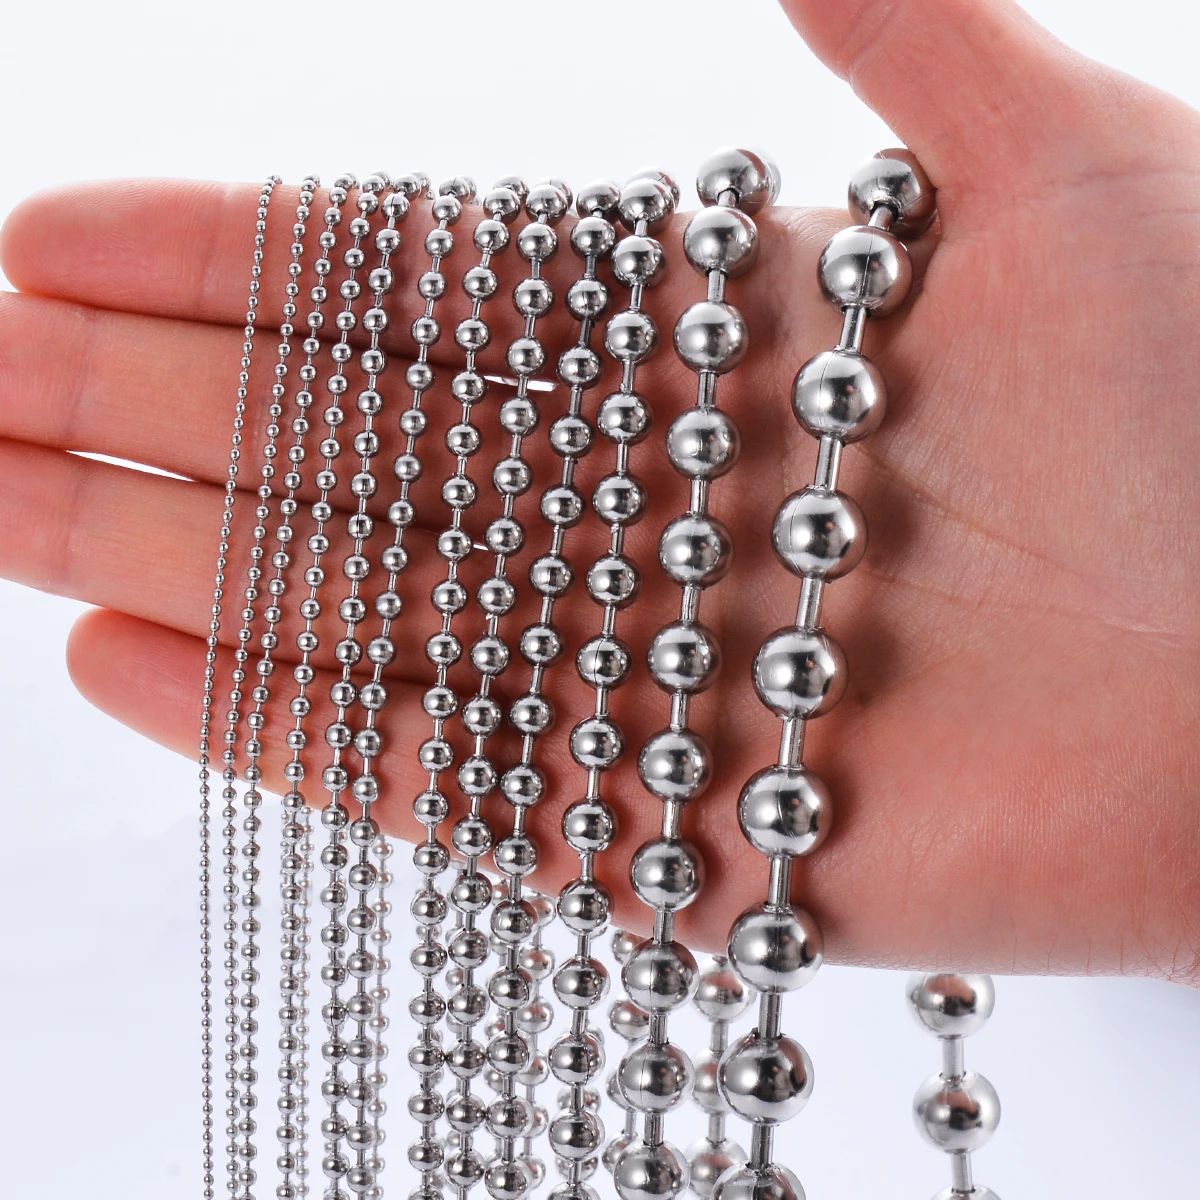 wide1.2-6mm Stainless Steel Ball Chain Necklace For Pendant or Dog Tags Chains Jewelry Making  with 10 Connectors Wholesale